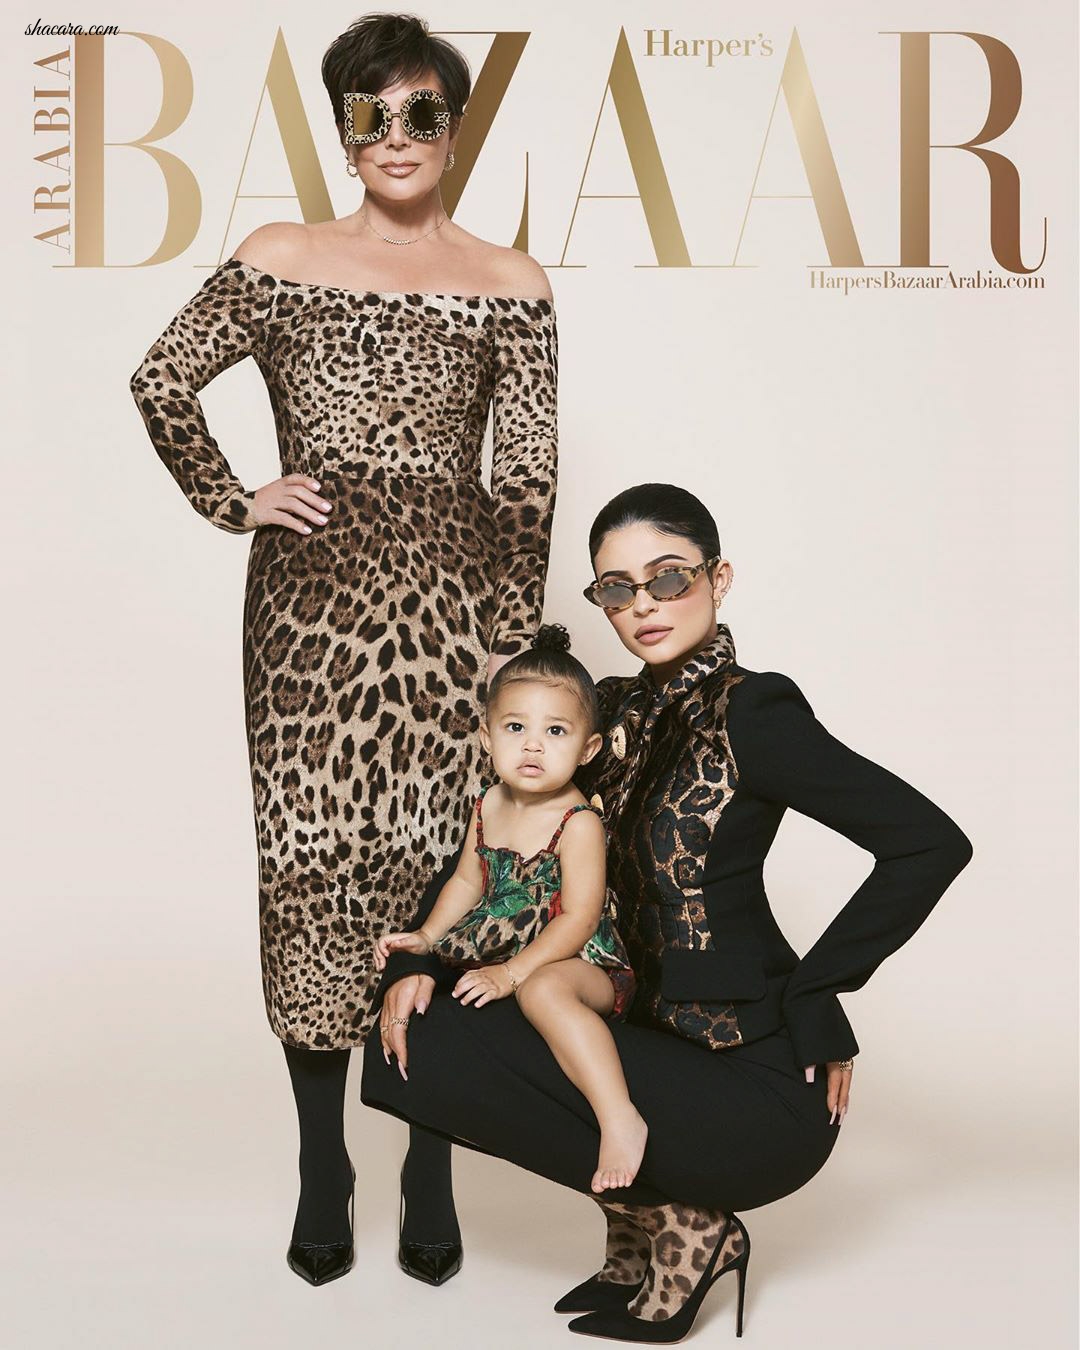 Hapers Bazaar Sits With Kris and Kylie Jenner, Discusses Family, Fame And Feminism